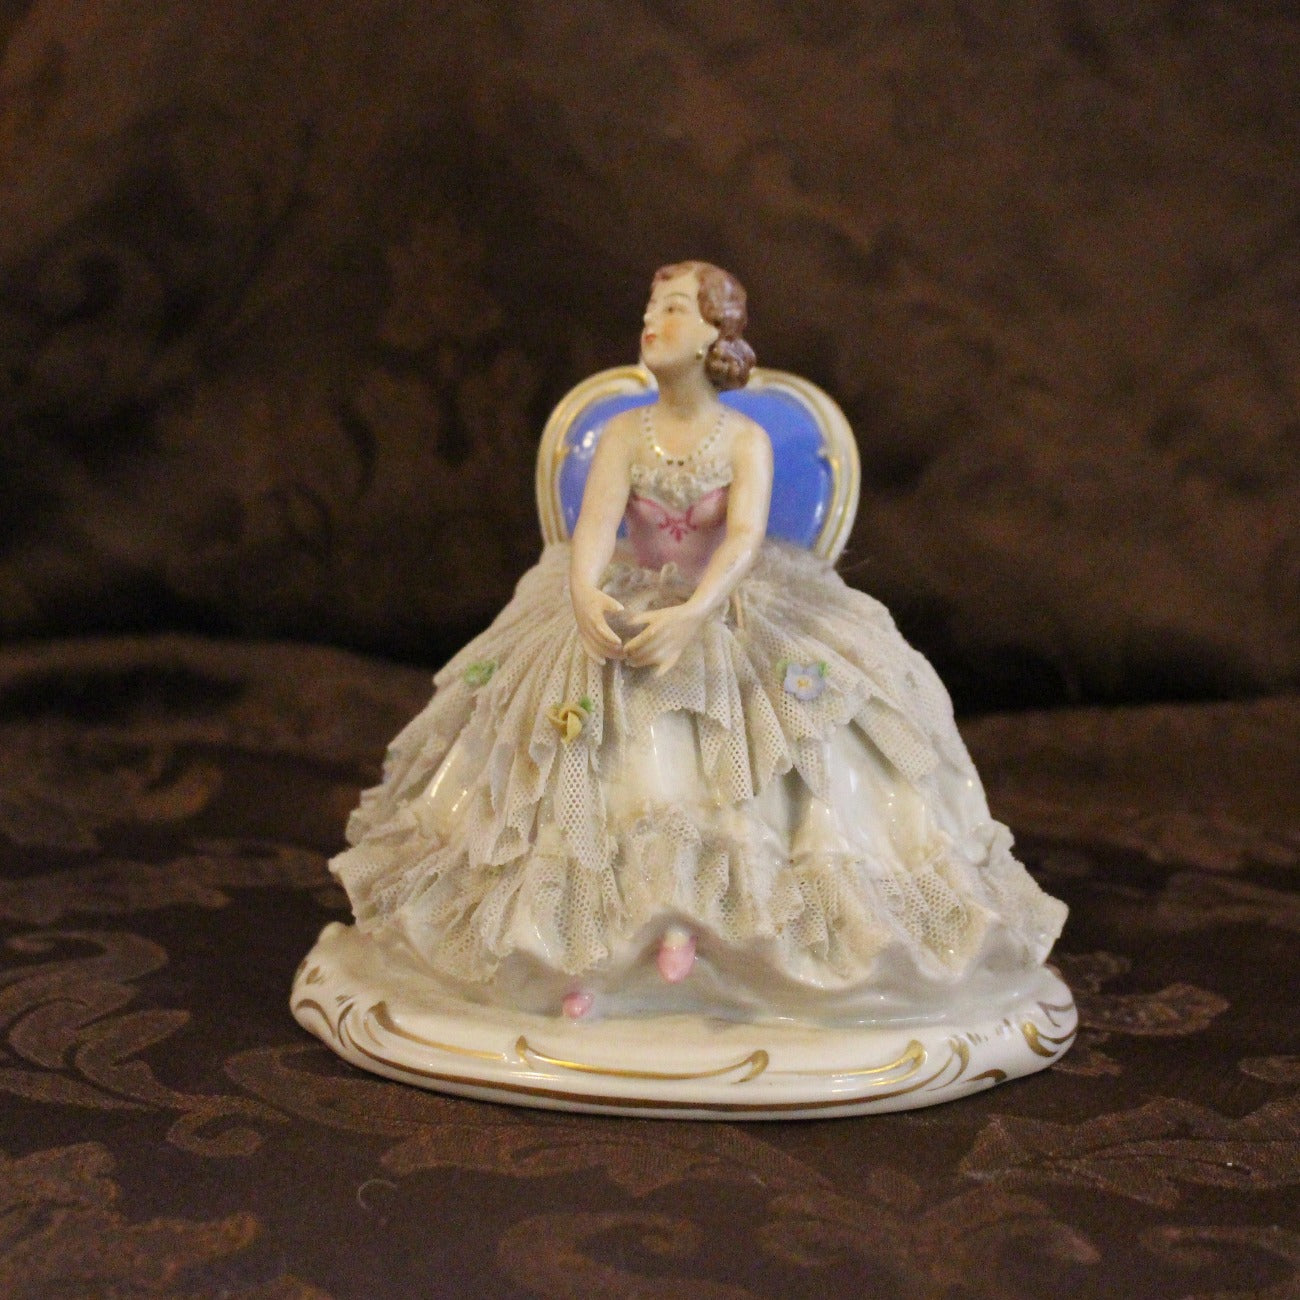 Franz Wittwer Glassworks lady sitting figurine in blue and pink with various color flowers.  Fine lace on dress